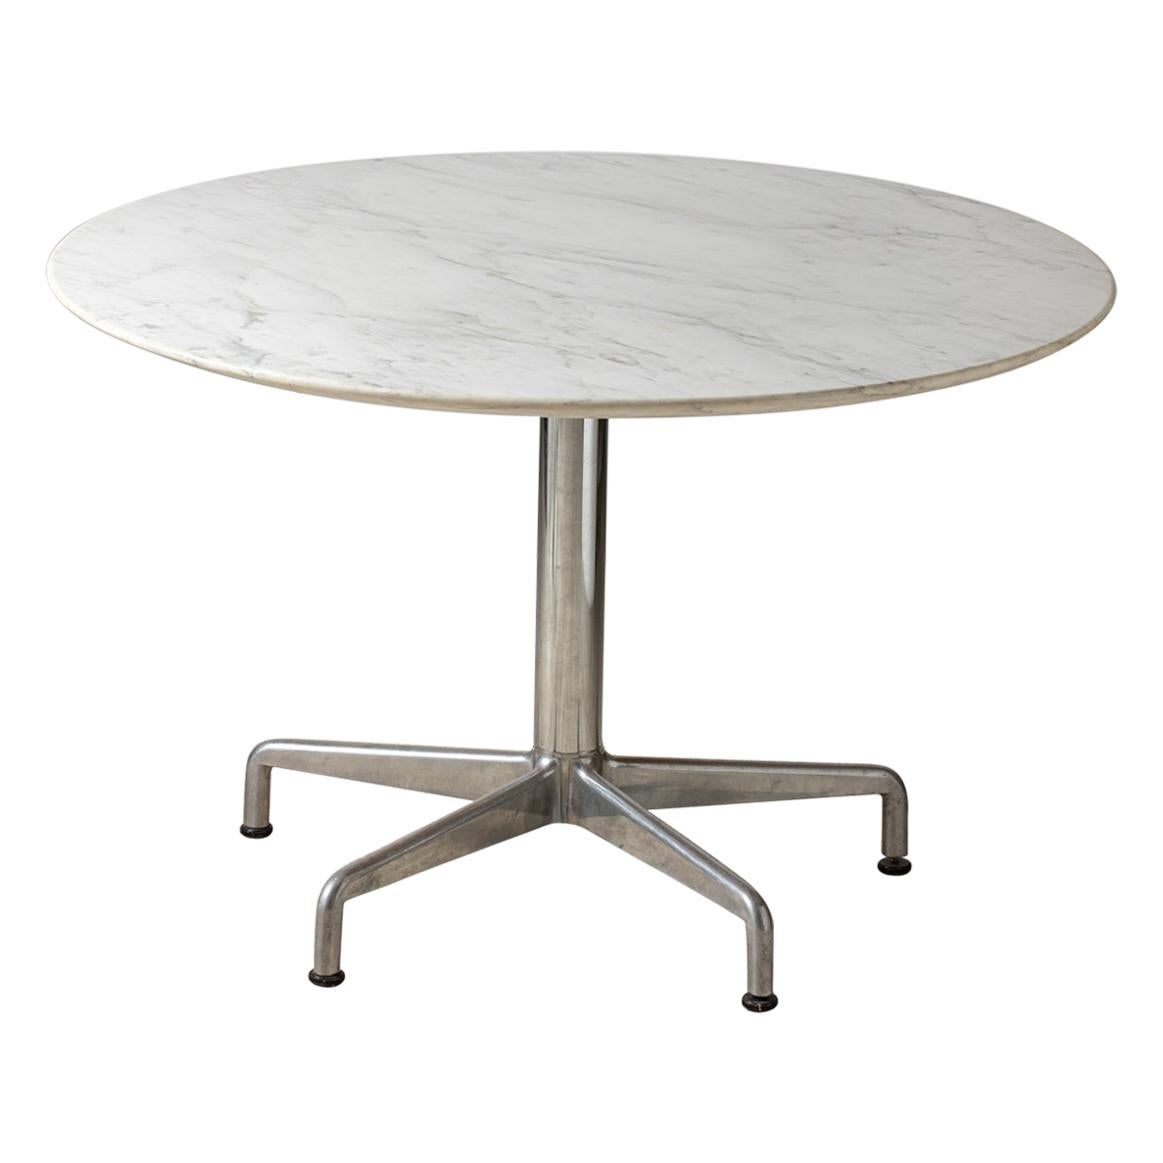 Charles Eames for Knoll, Round Segmented Dining Table, circa 1964